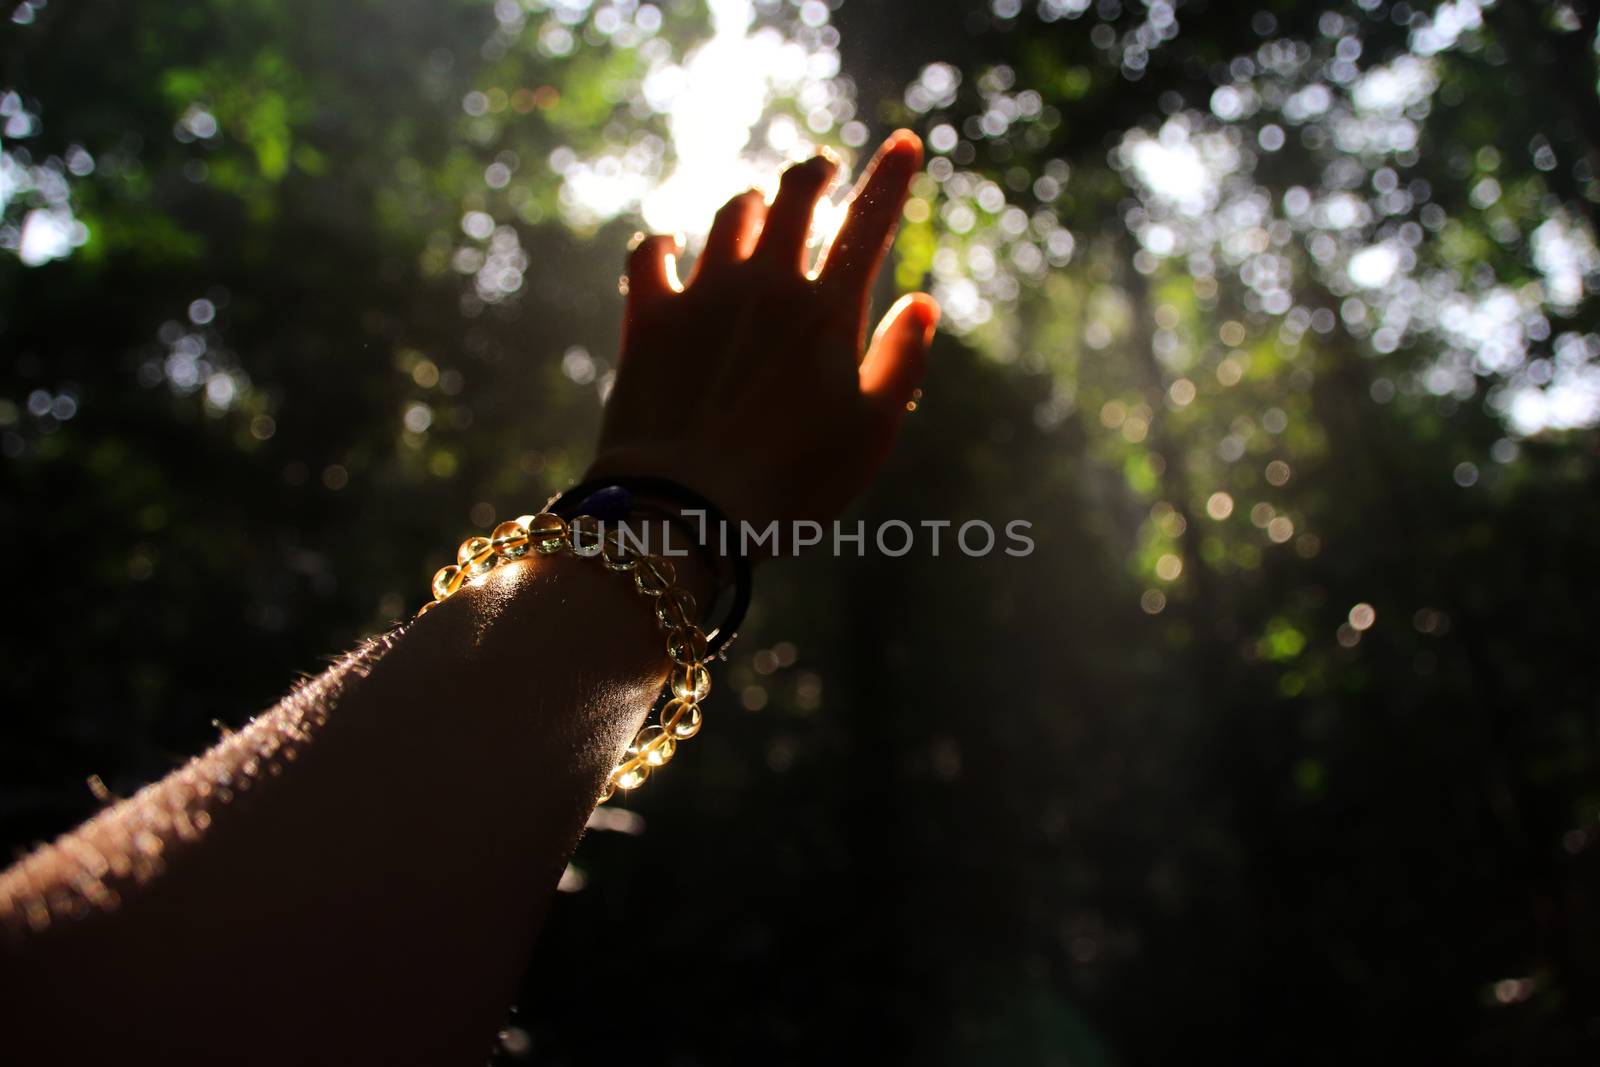 Conceptual photo showing harmony and being one with nature, healing power of nature and the mental well being